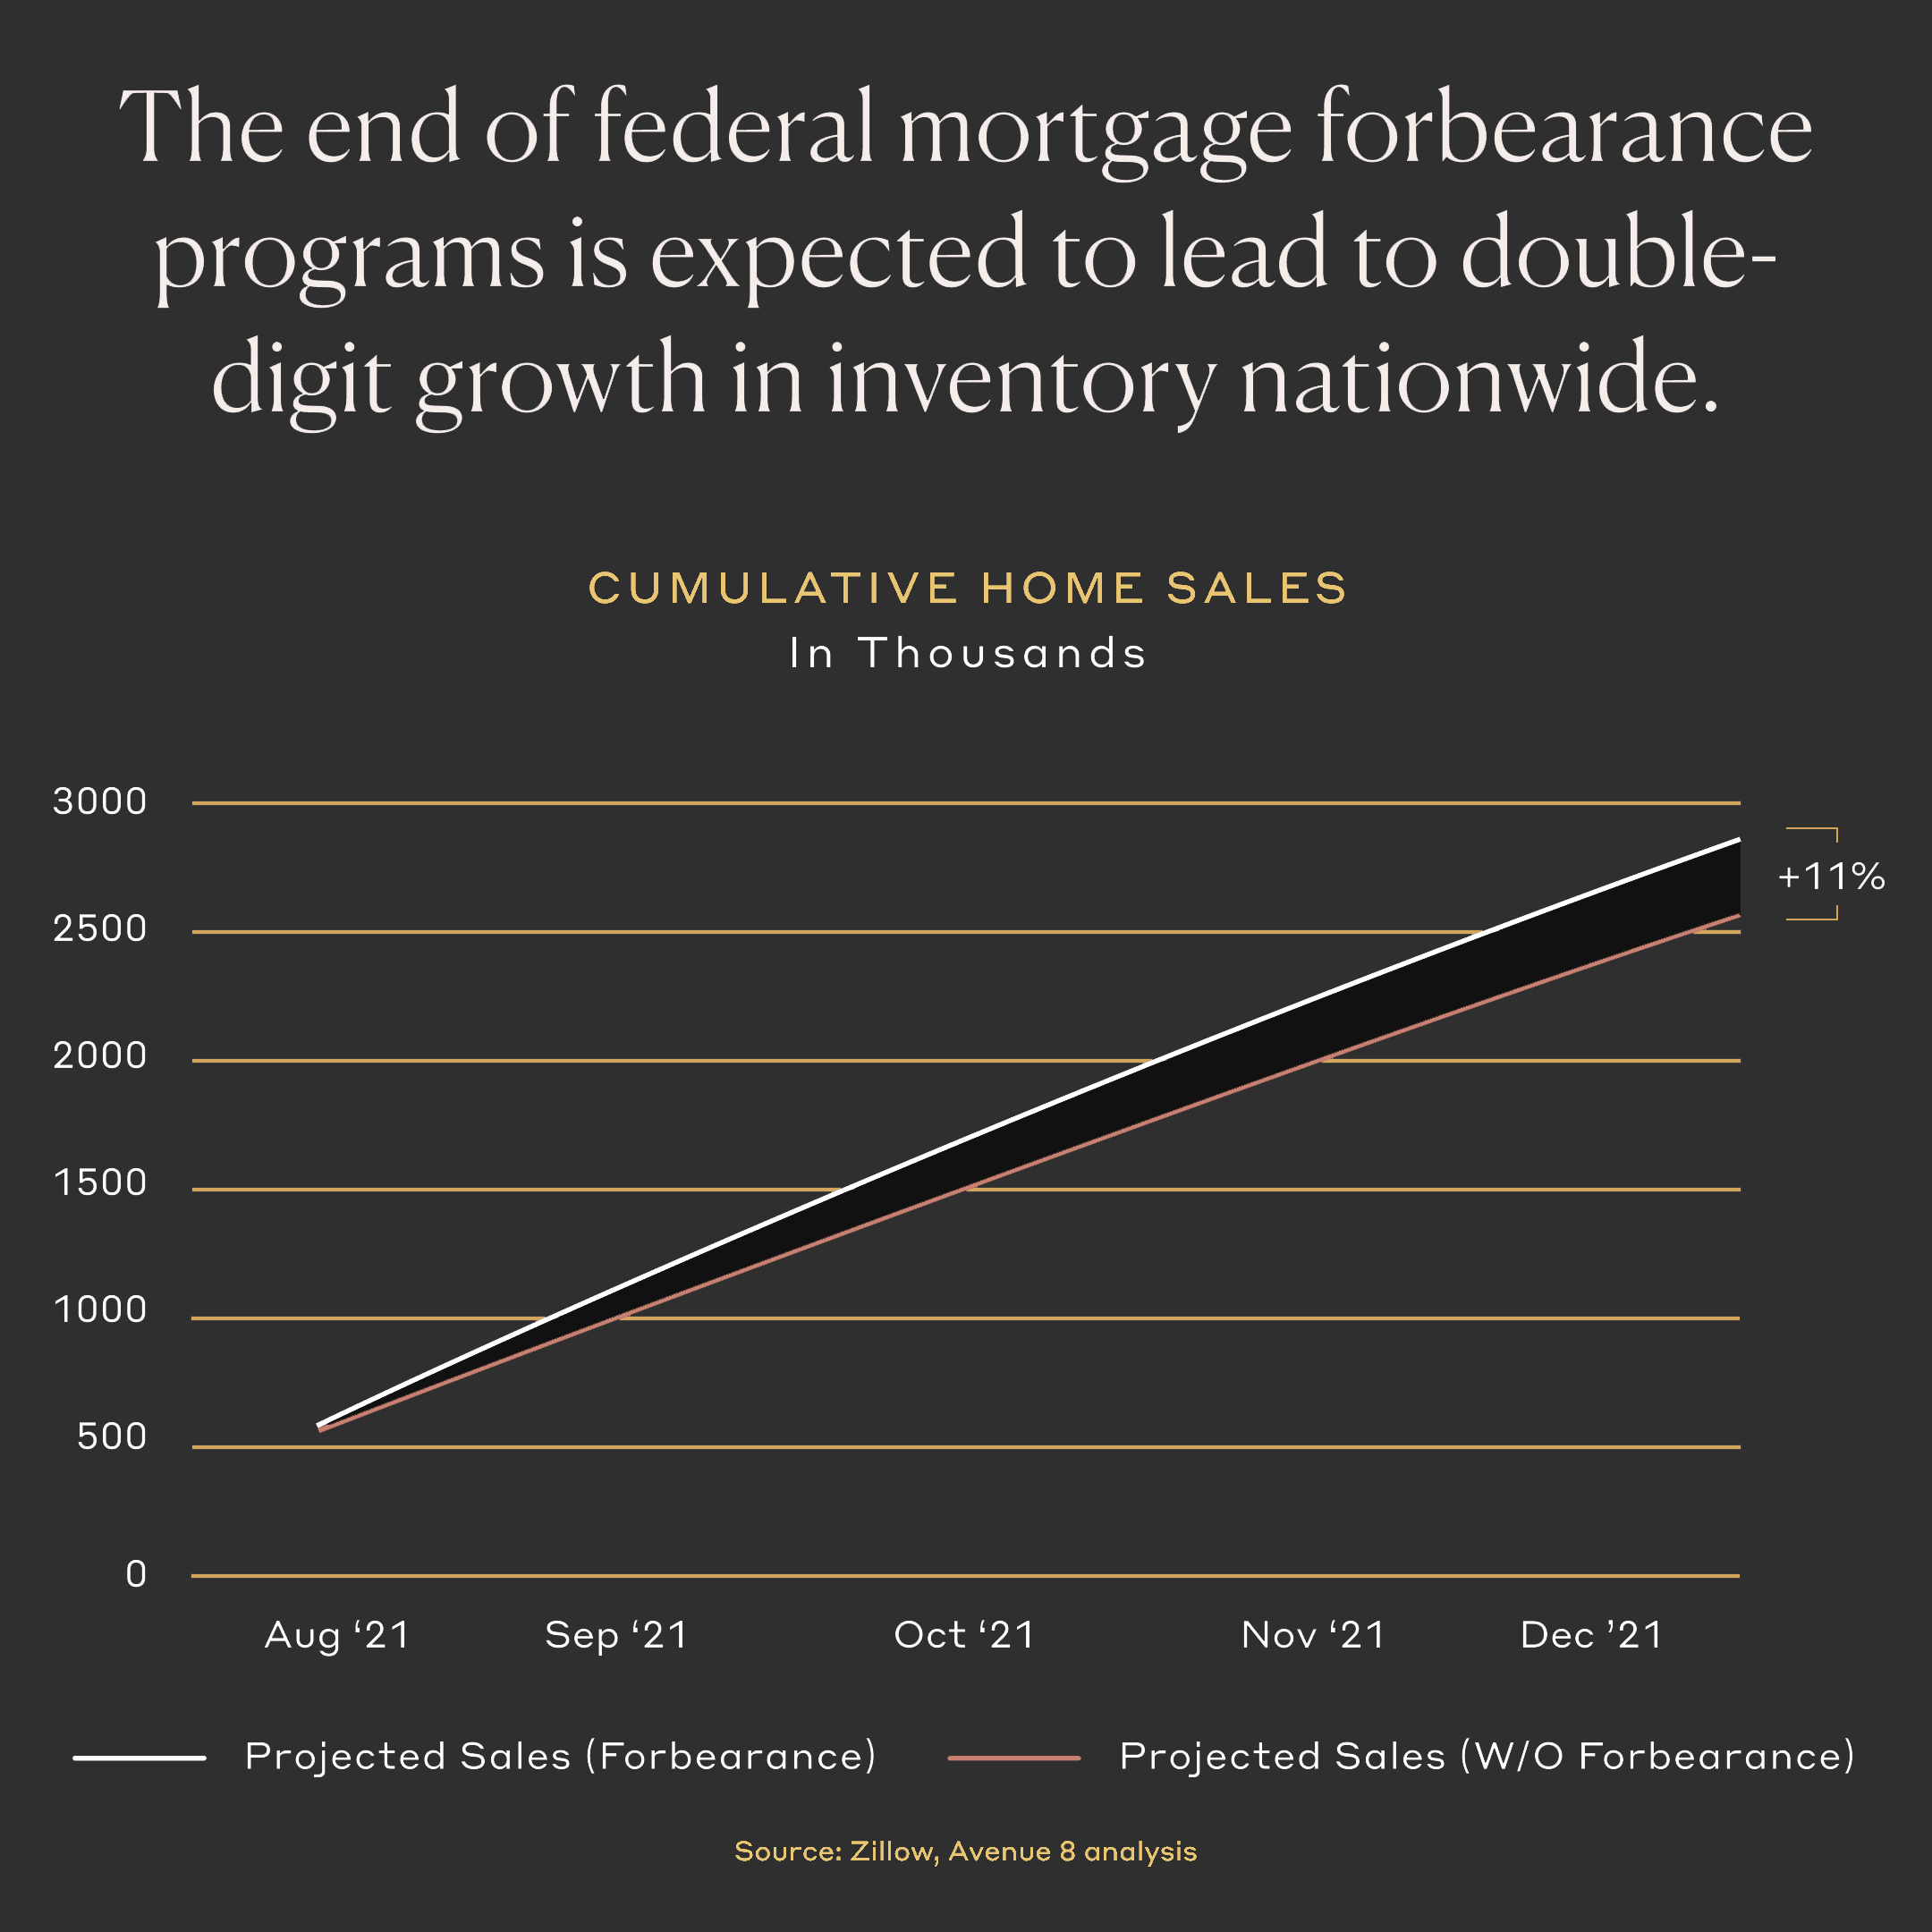 The end of federal mortgage forbearance programs is expected to lead to double-digit growth in inventory nationwide.